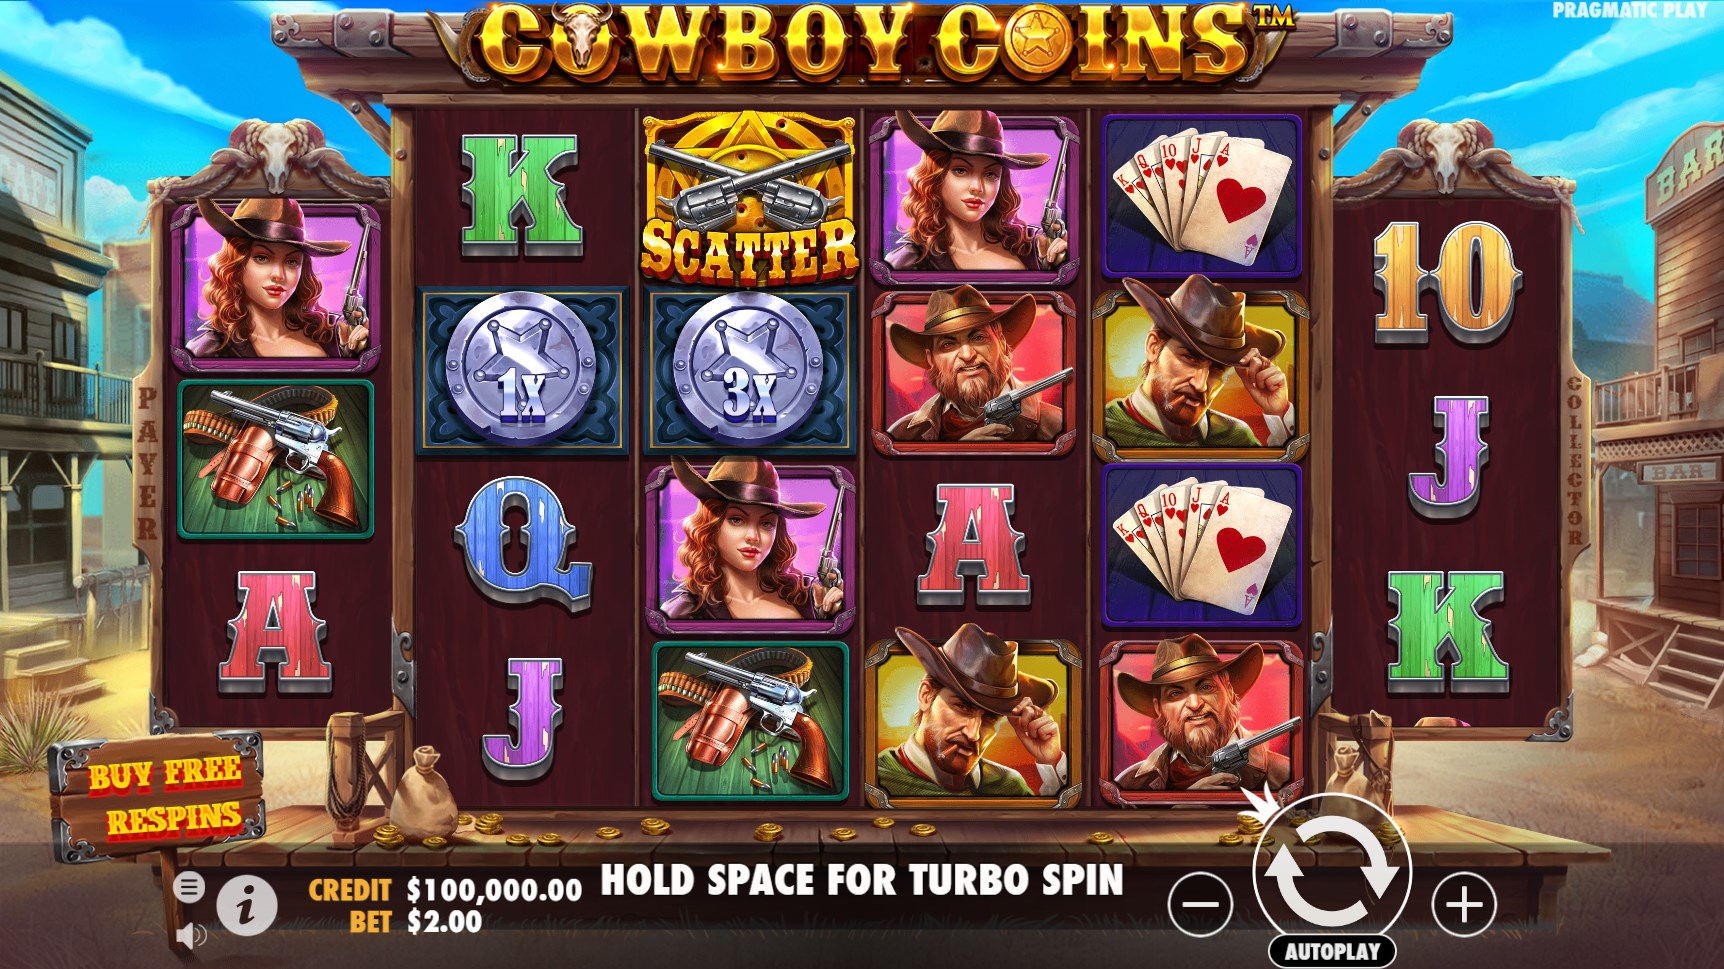 Cowboy Coins Online Slot by Pragmatic Play